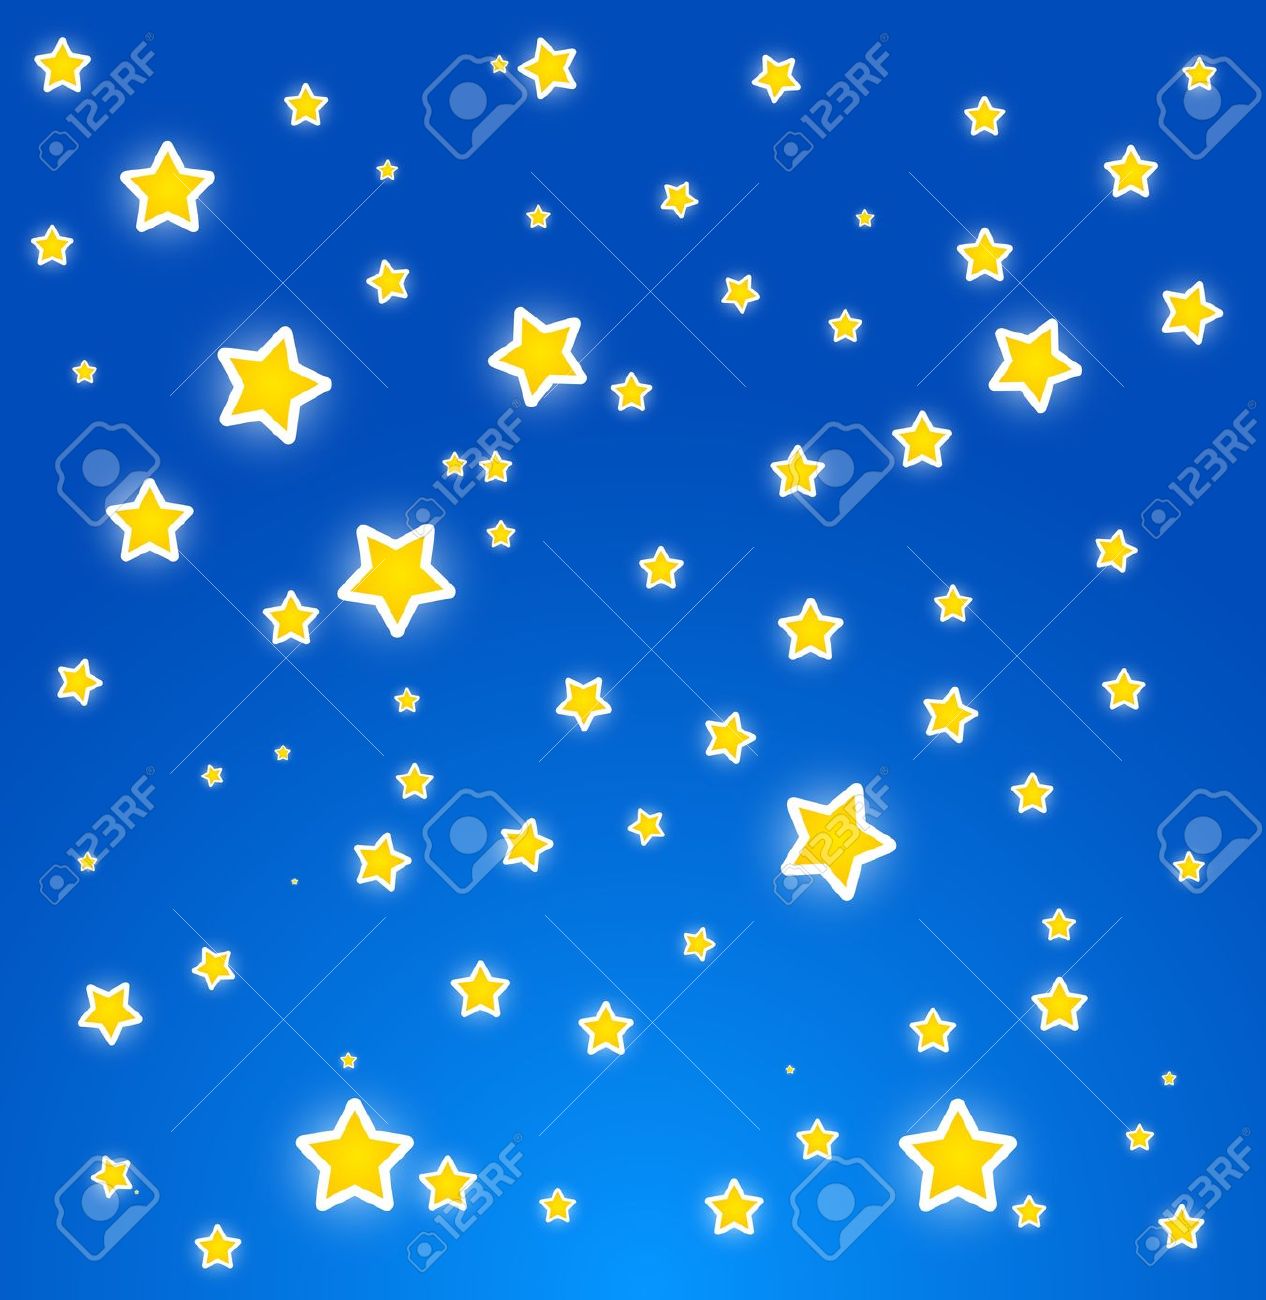 starry night clipart background - photo #24